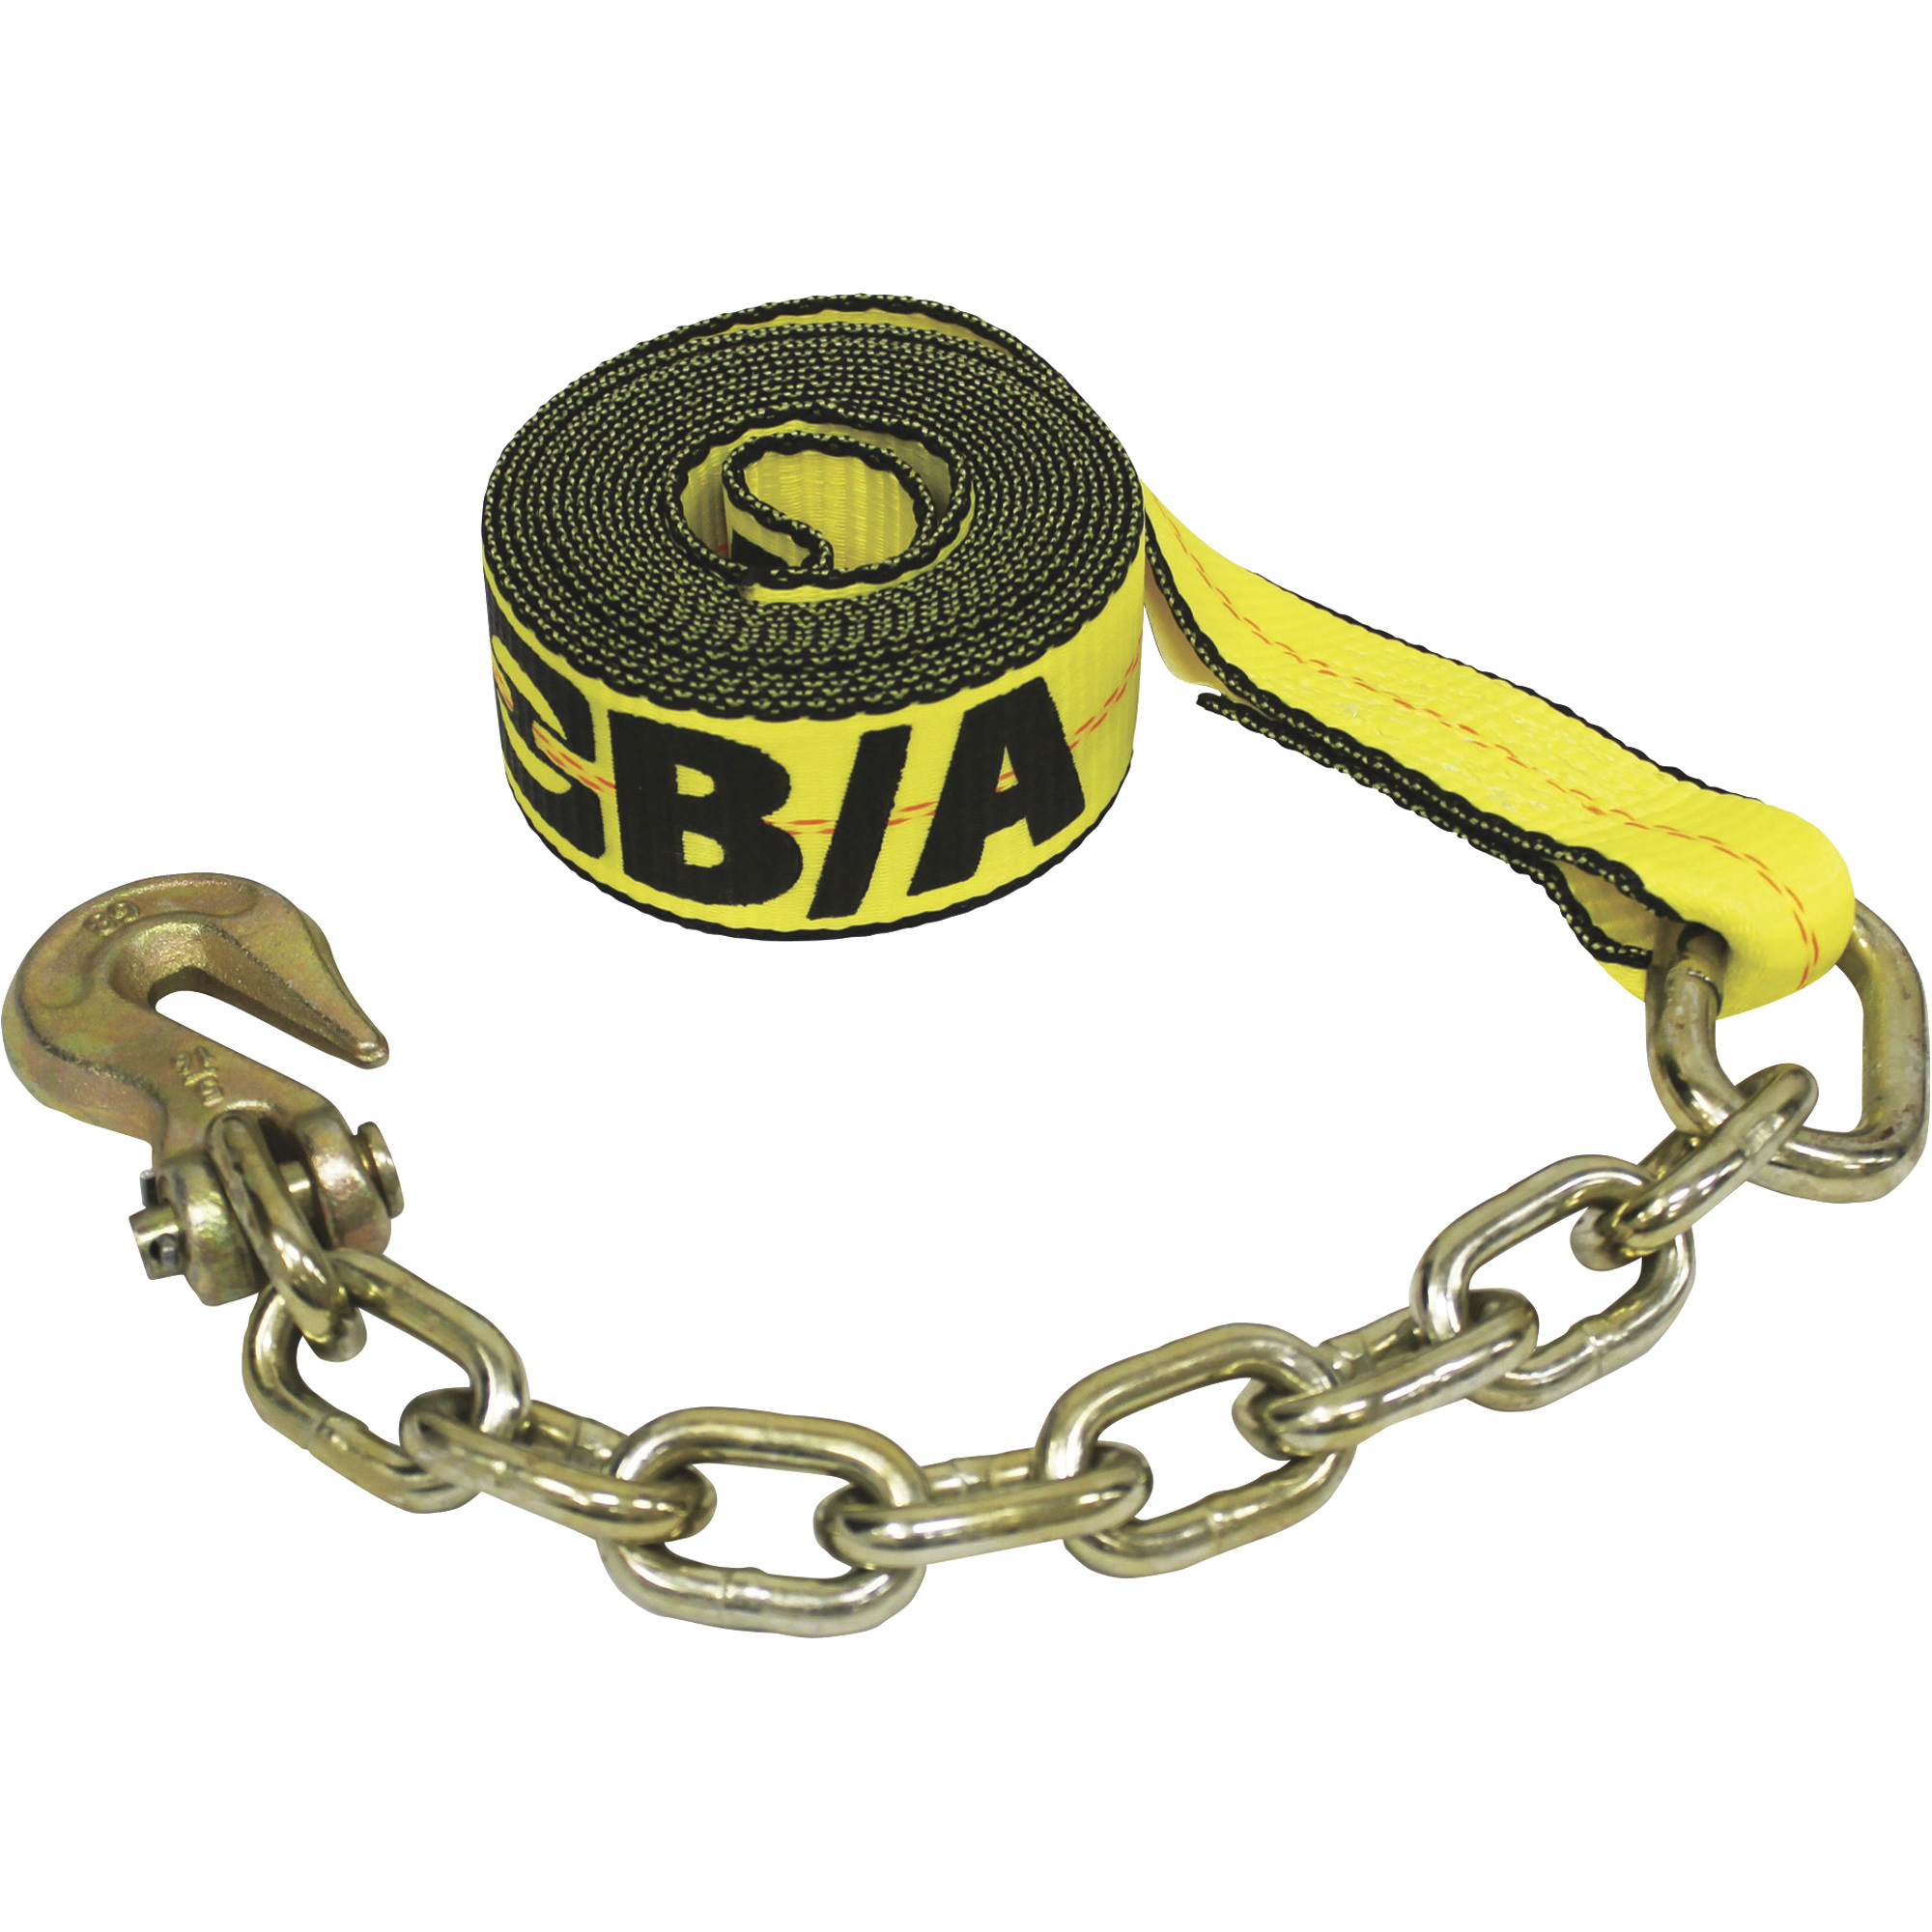 B/A Products 2Inch x 14ft. Polyester Strap With 12Inch Chain and Grab Hook â 4000-Lb. Working Load, Model 38-200C-LG